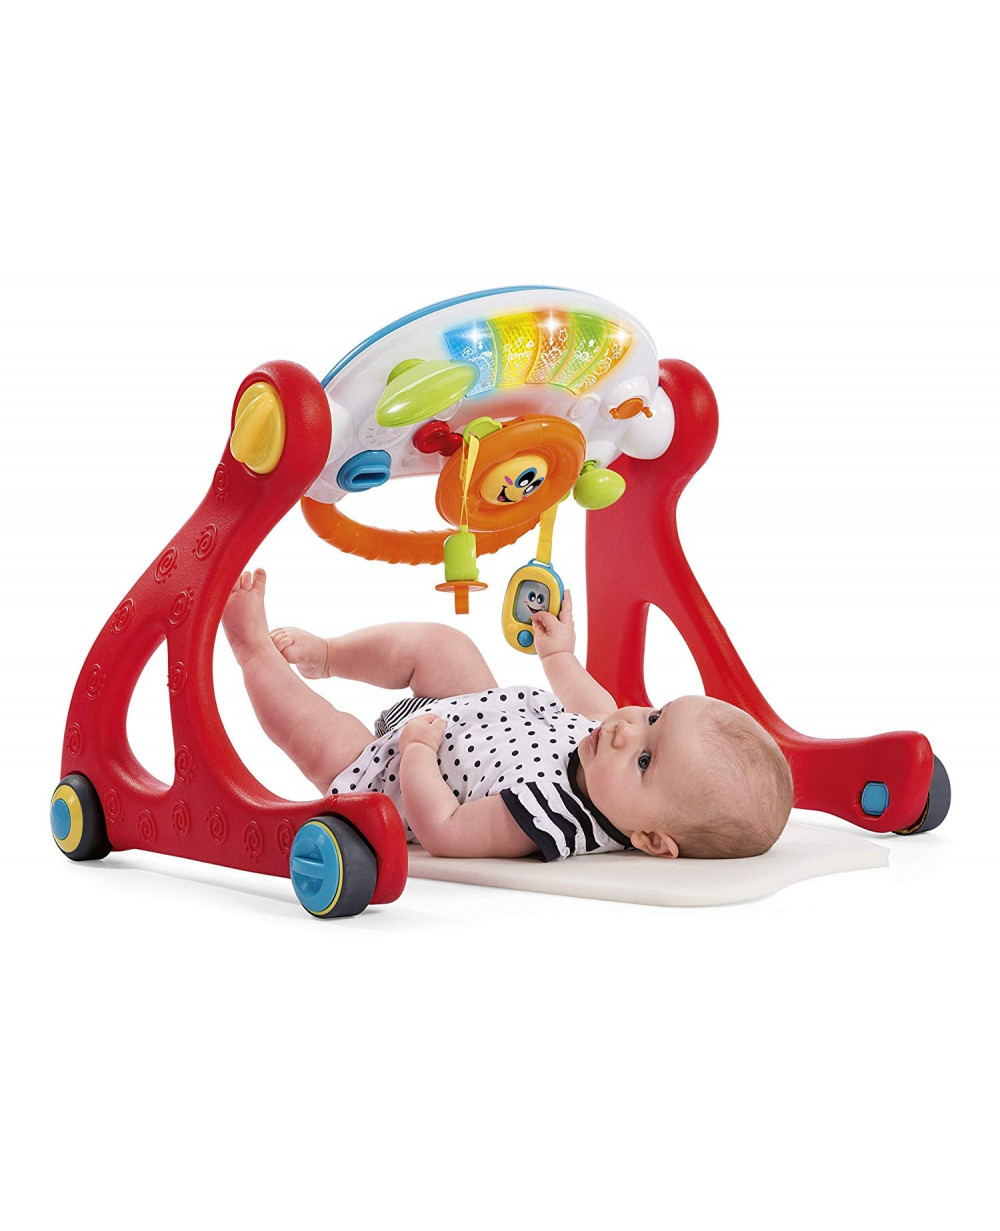 Chicco Grow And Walk Gym 4 In 1